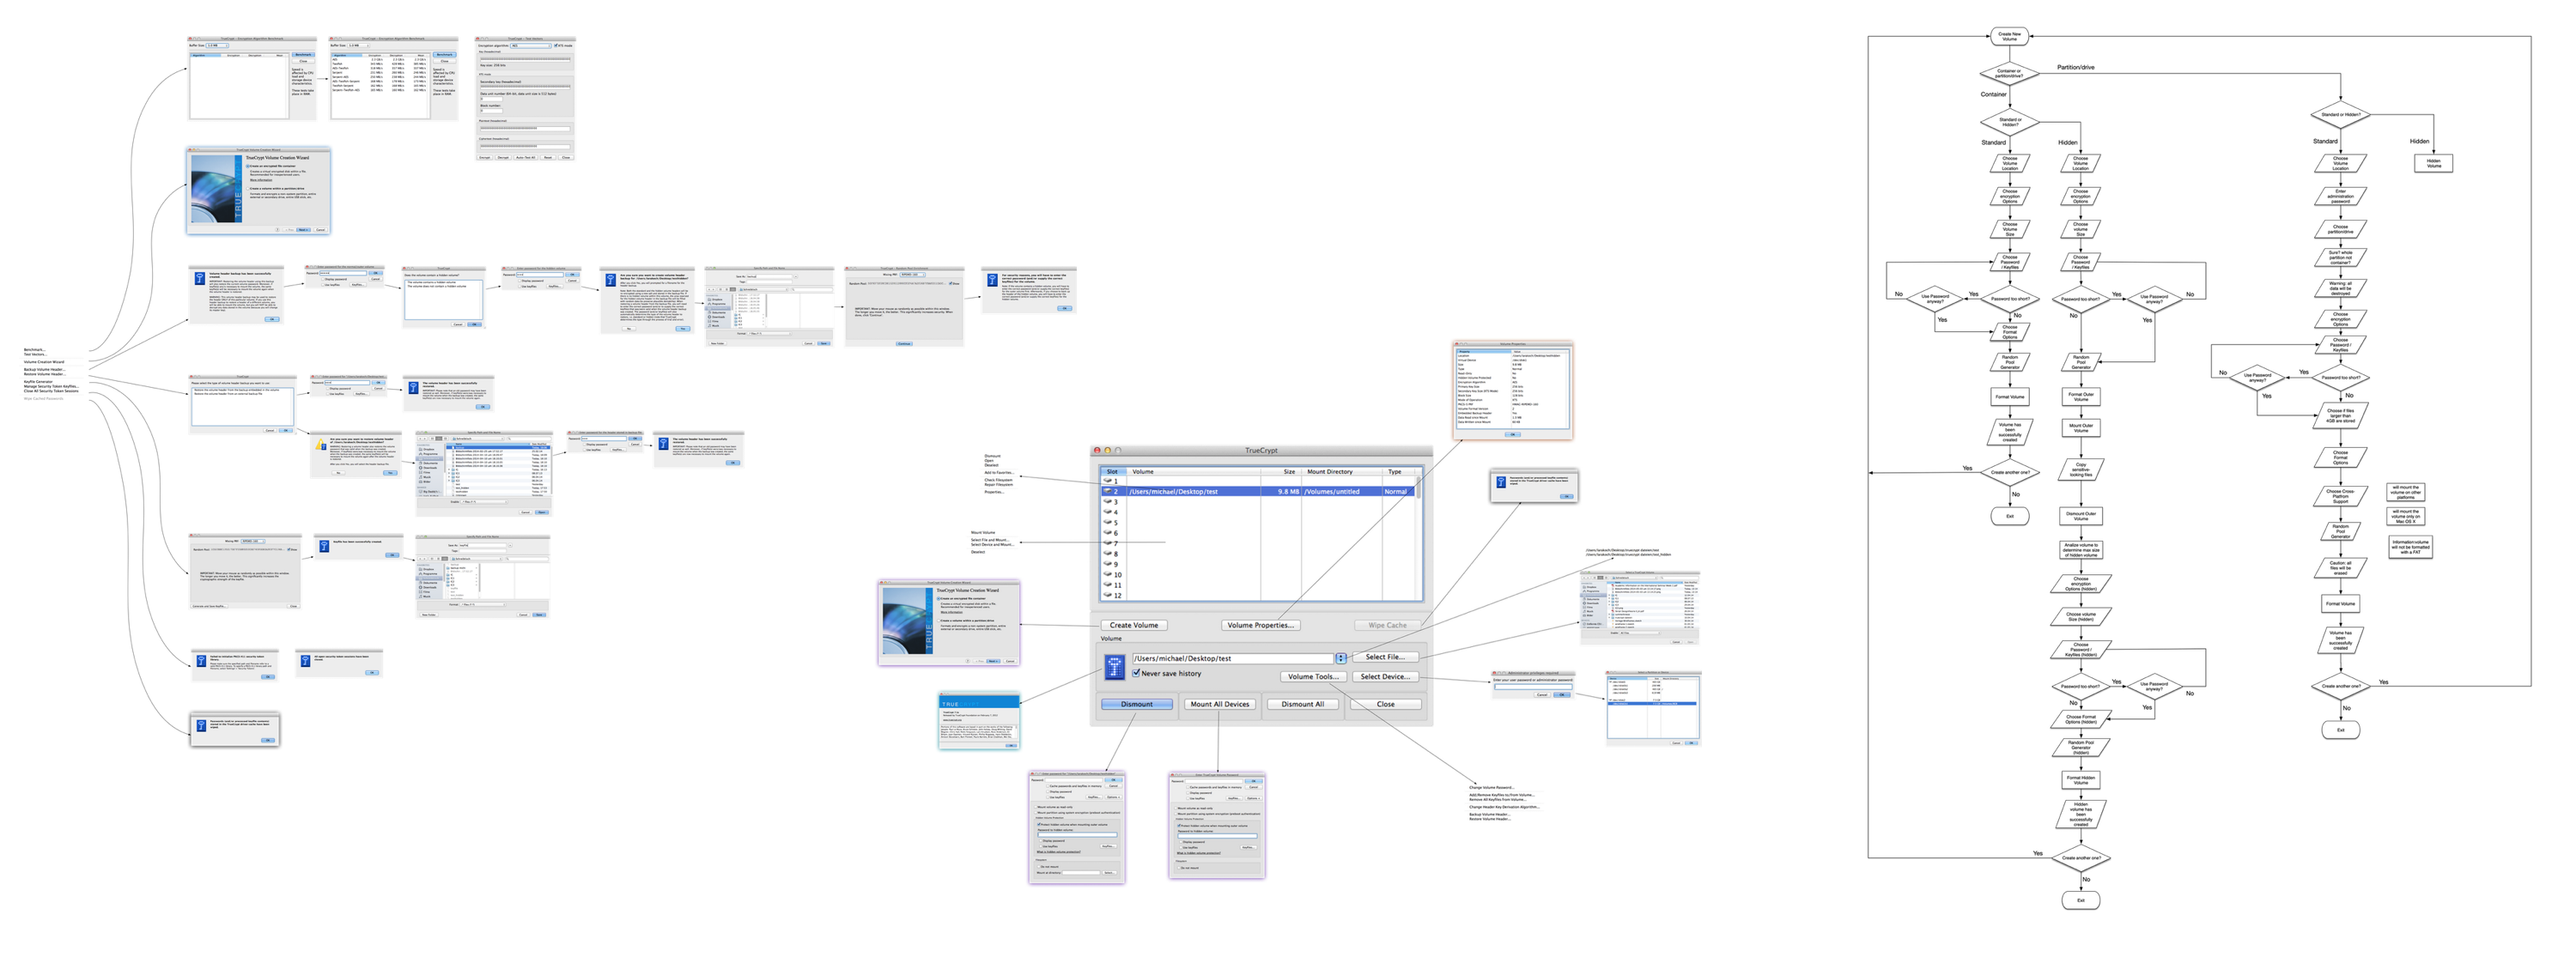 Visual analysis of TrueCrypt's Information Architecture, with screenshots of various menu interfaces.